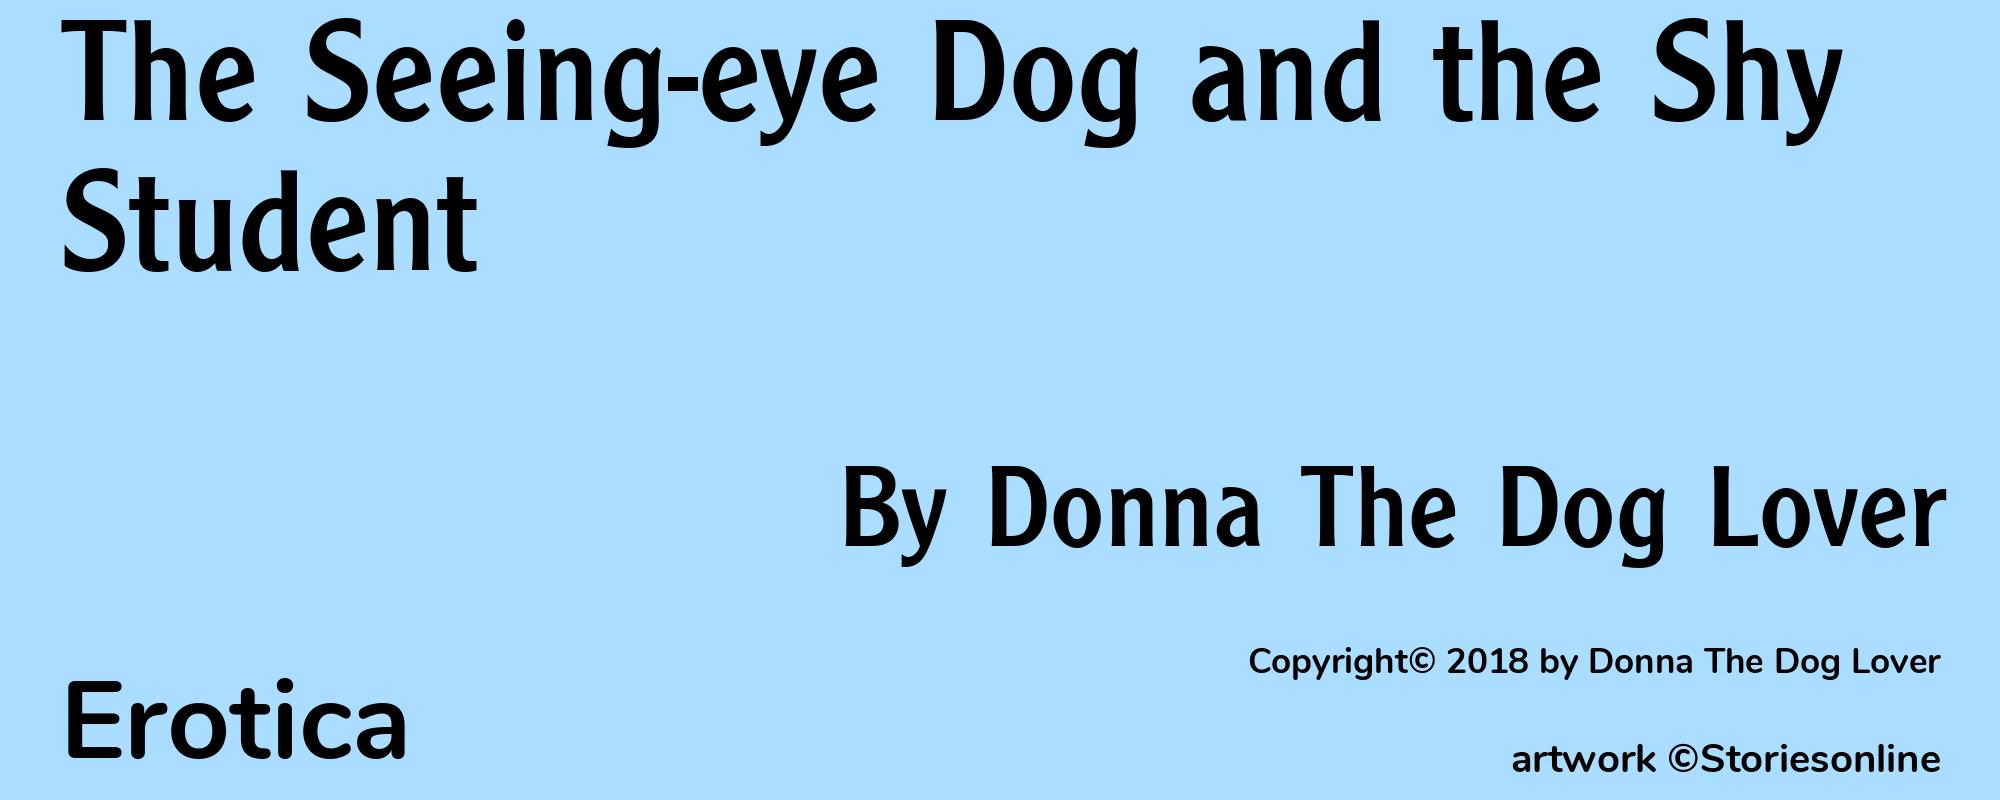 The Seeing-eye Dog and the Shy Student - Cover